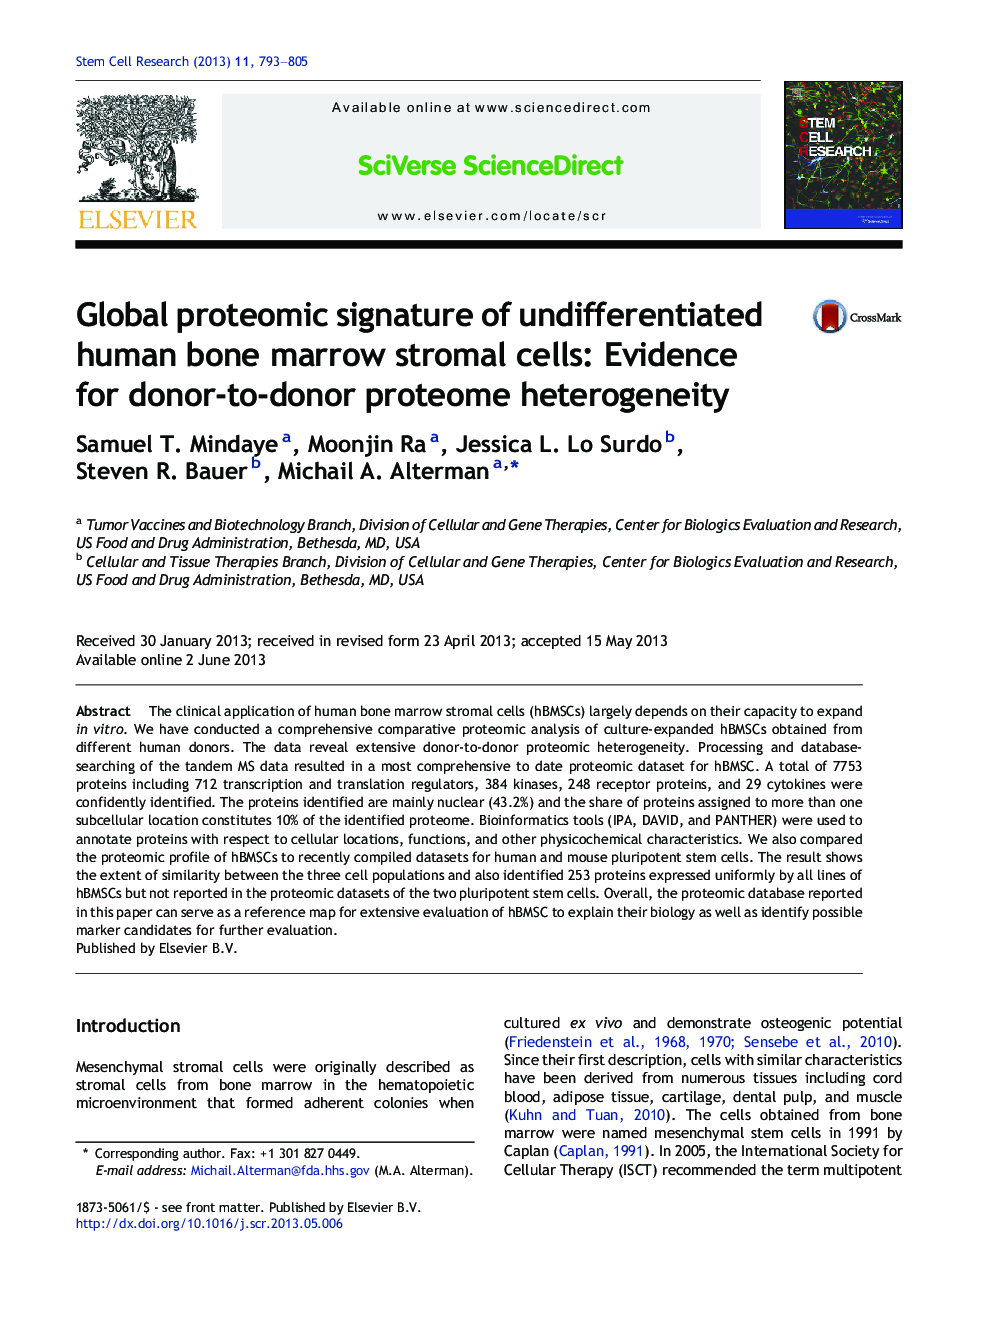 Global proteomic signature of undifferentiated human bone marrow stromal cells: Evidence for donor-to-donor proteome heterogeneity